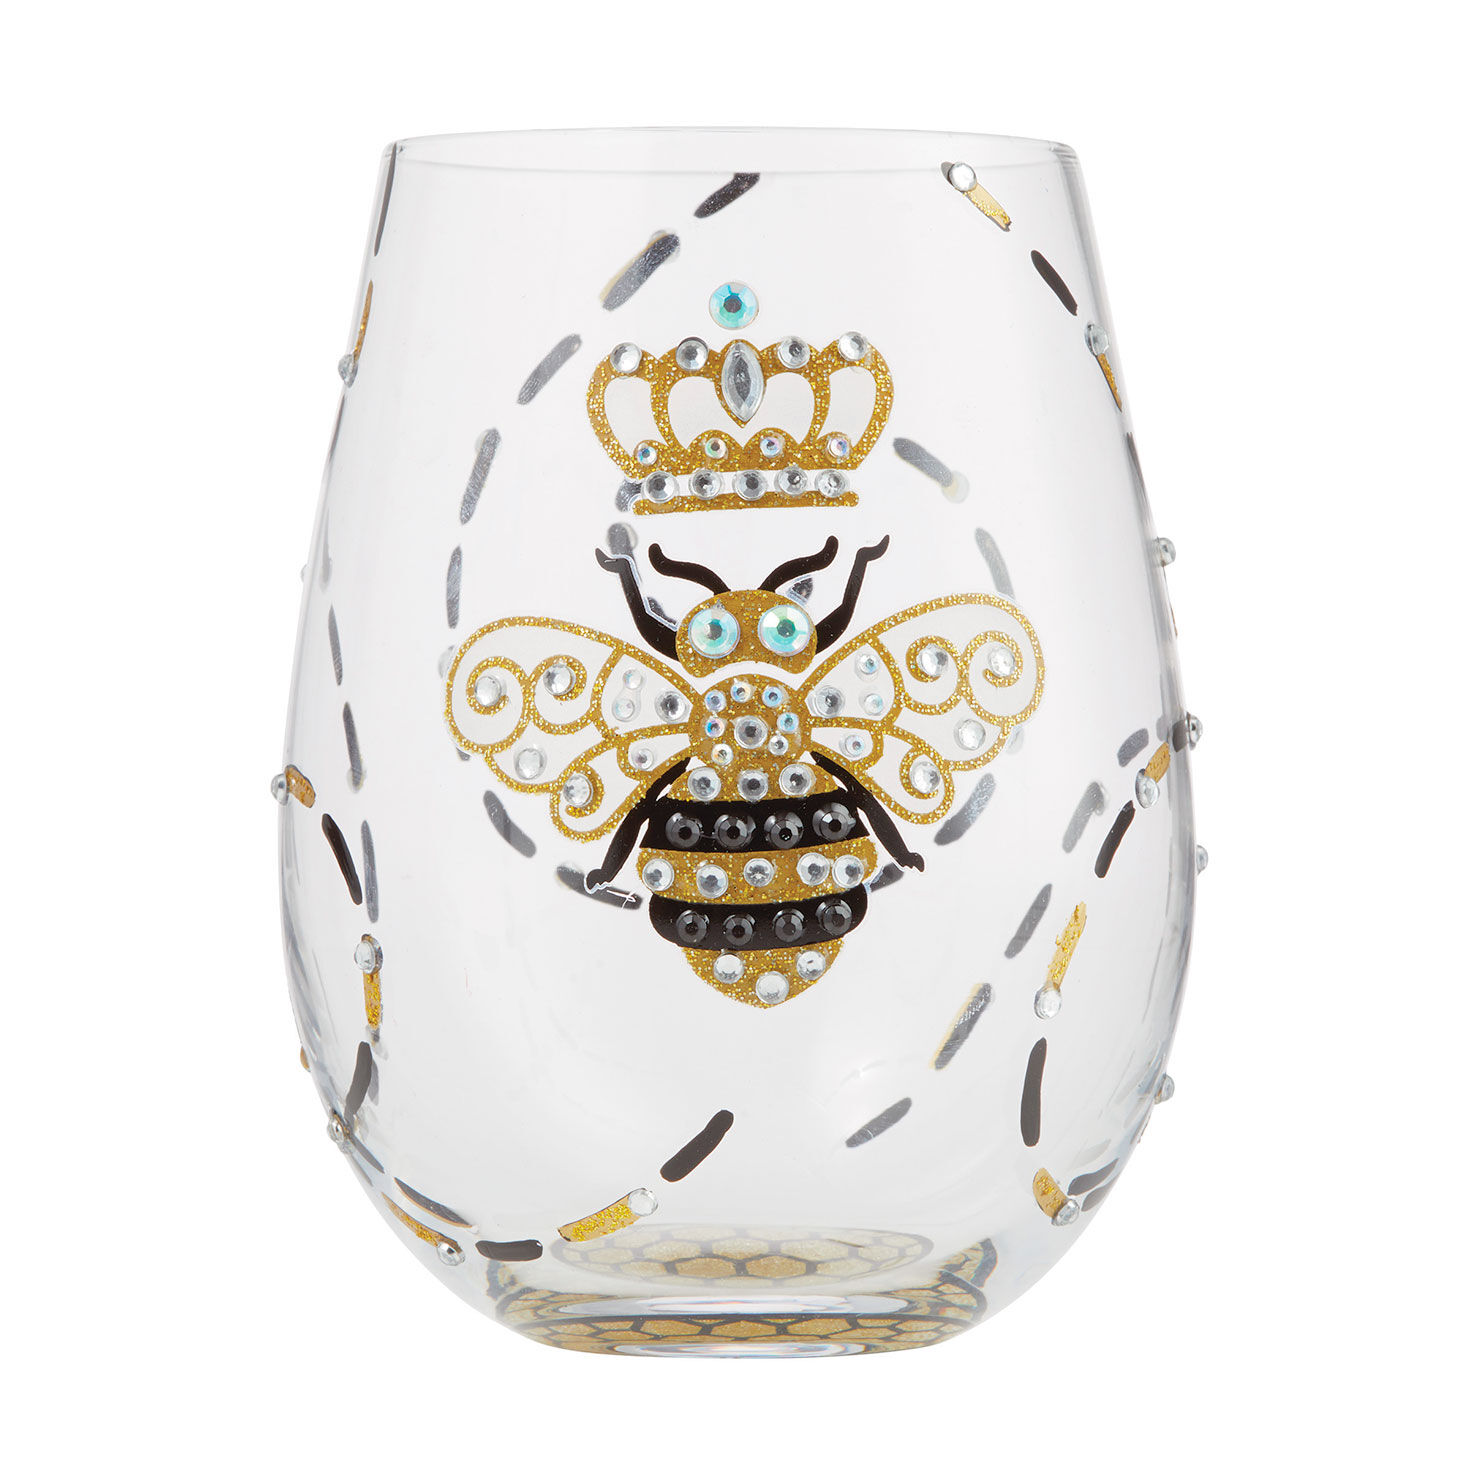 Lolita Queen Bee Handpainted Stemless Wine Glass, 20 oz. for only USD 19.99 | Hallmark